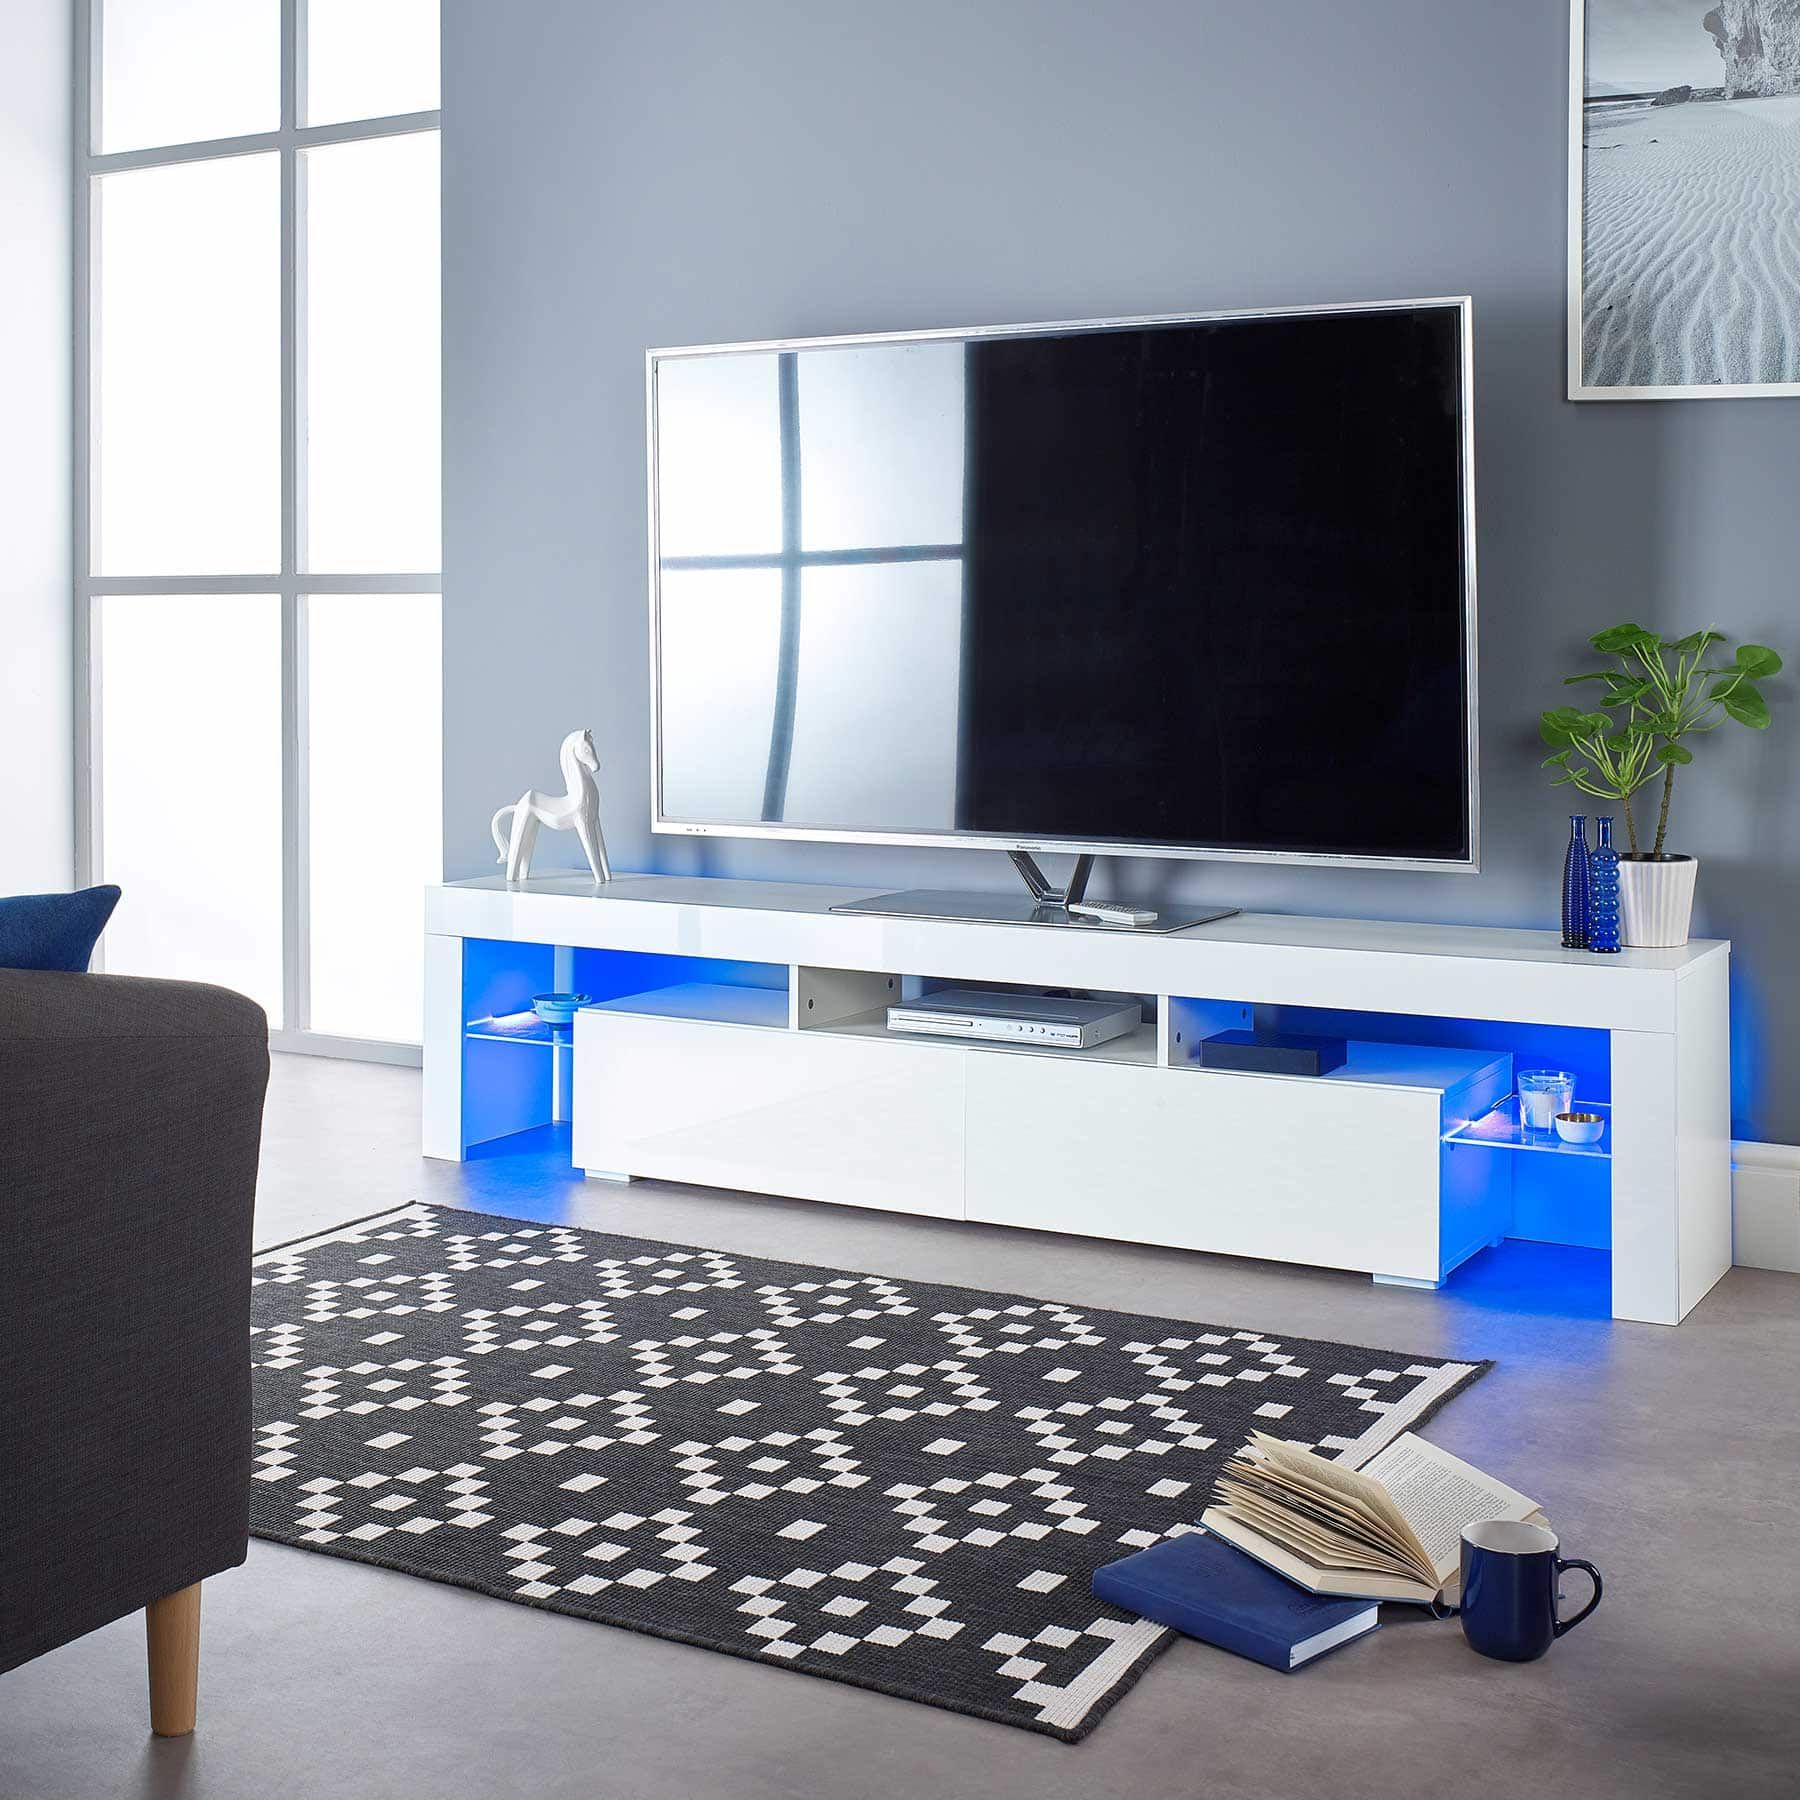 Ts1704 Wide 200cm White Tv Cabinet For Up To 80″ Screens | Mmt With Bromley White Wide Tv Stands (View 8 of 15)